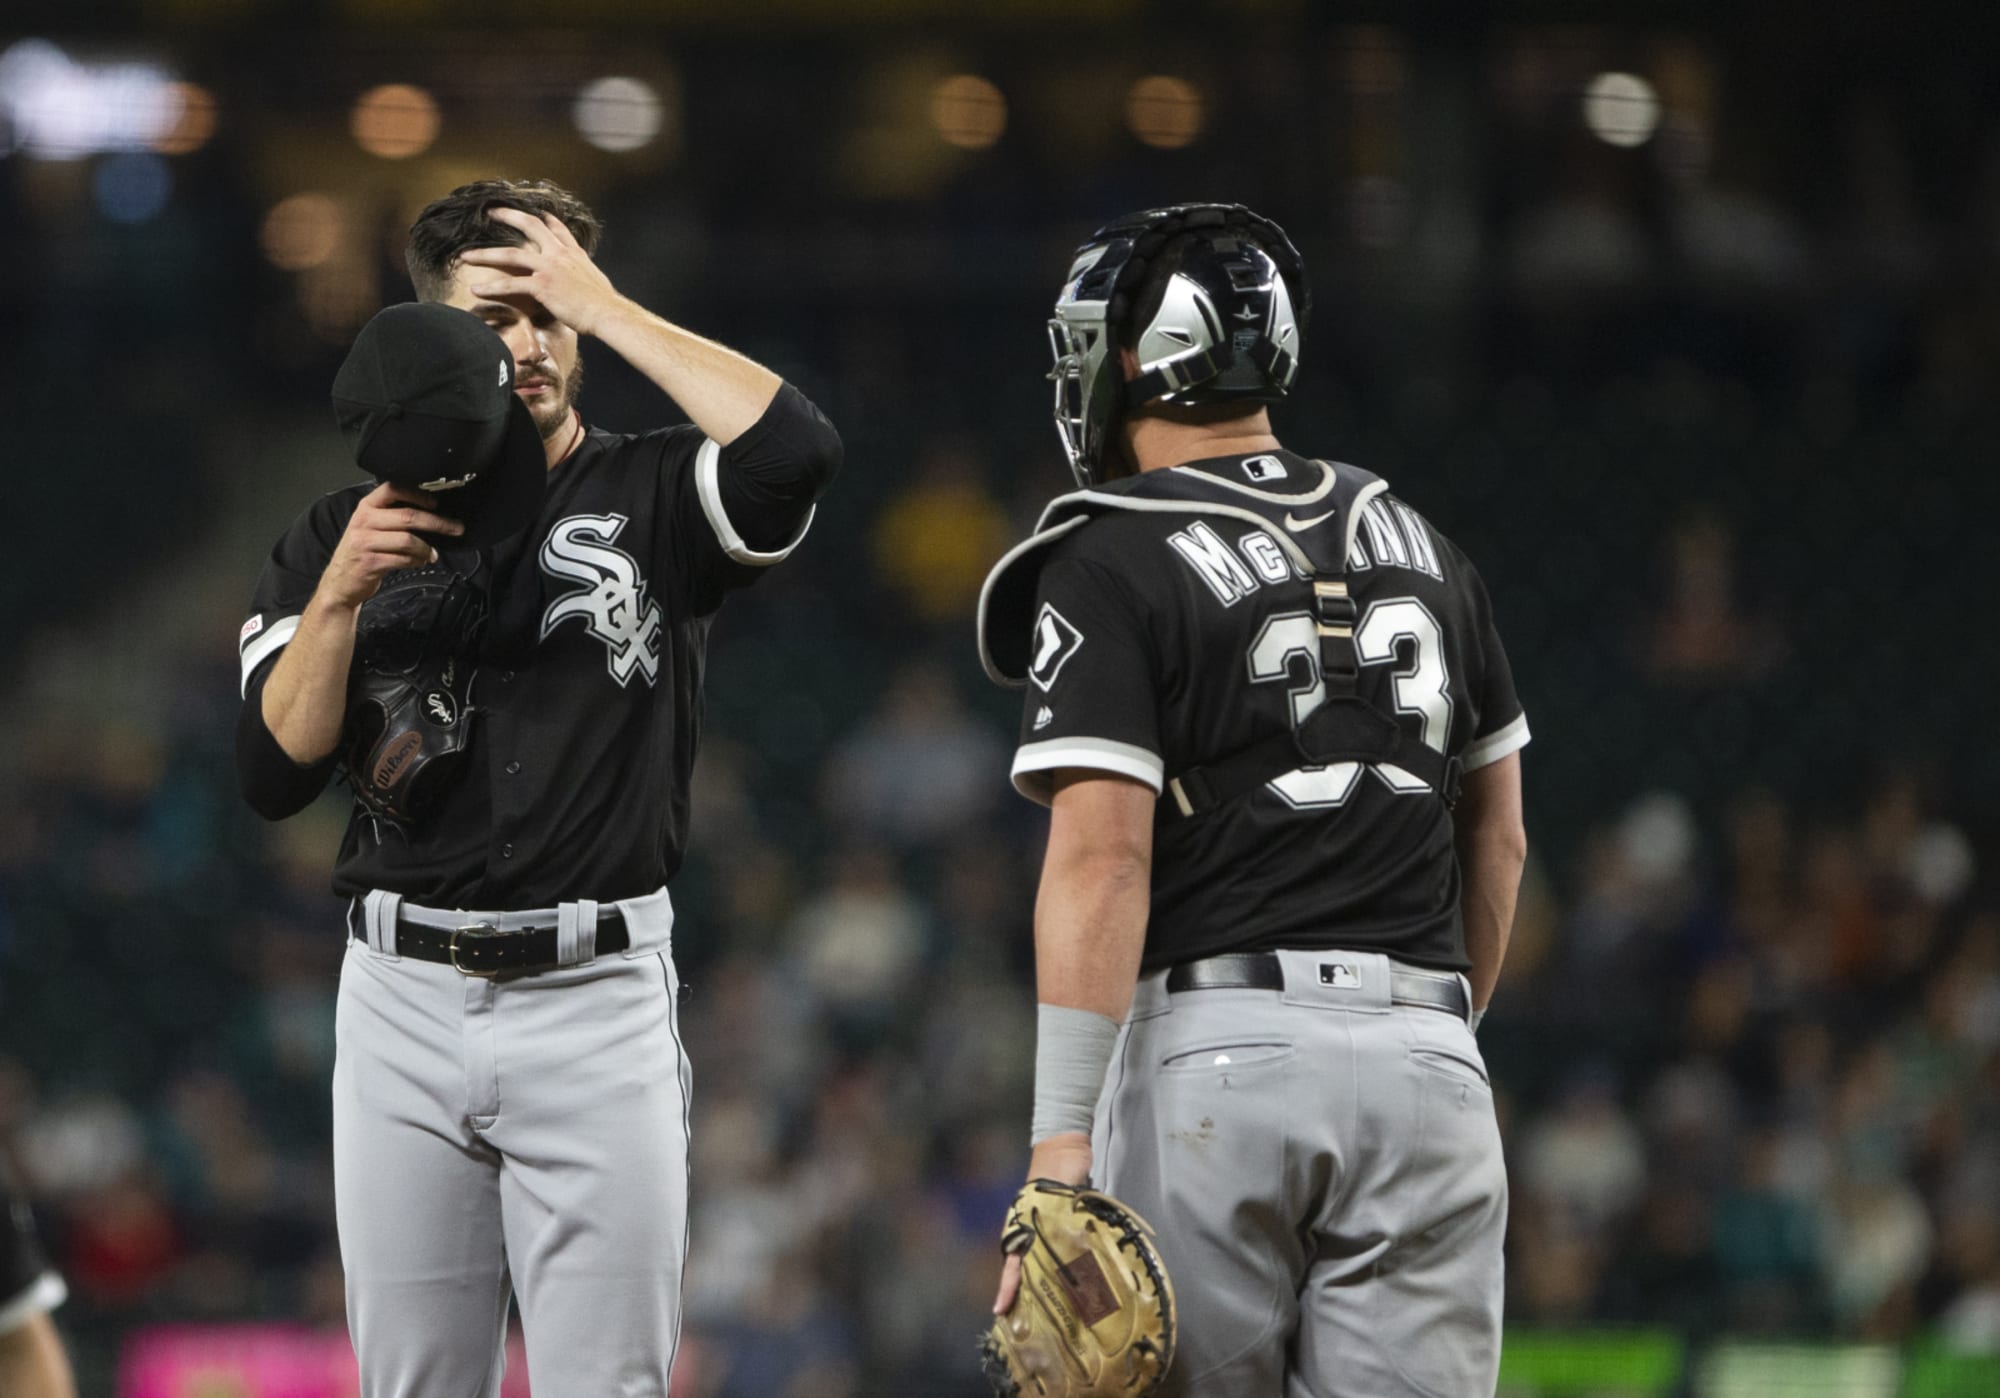 Promising Signs for the White Sox Despite Early Injuries